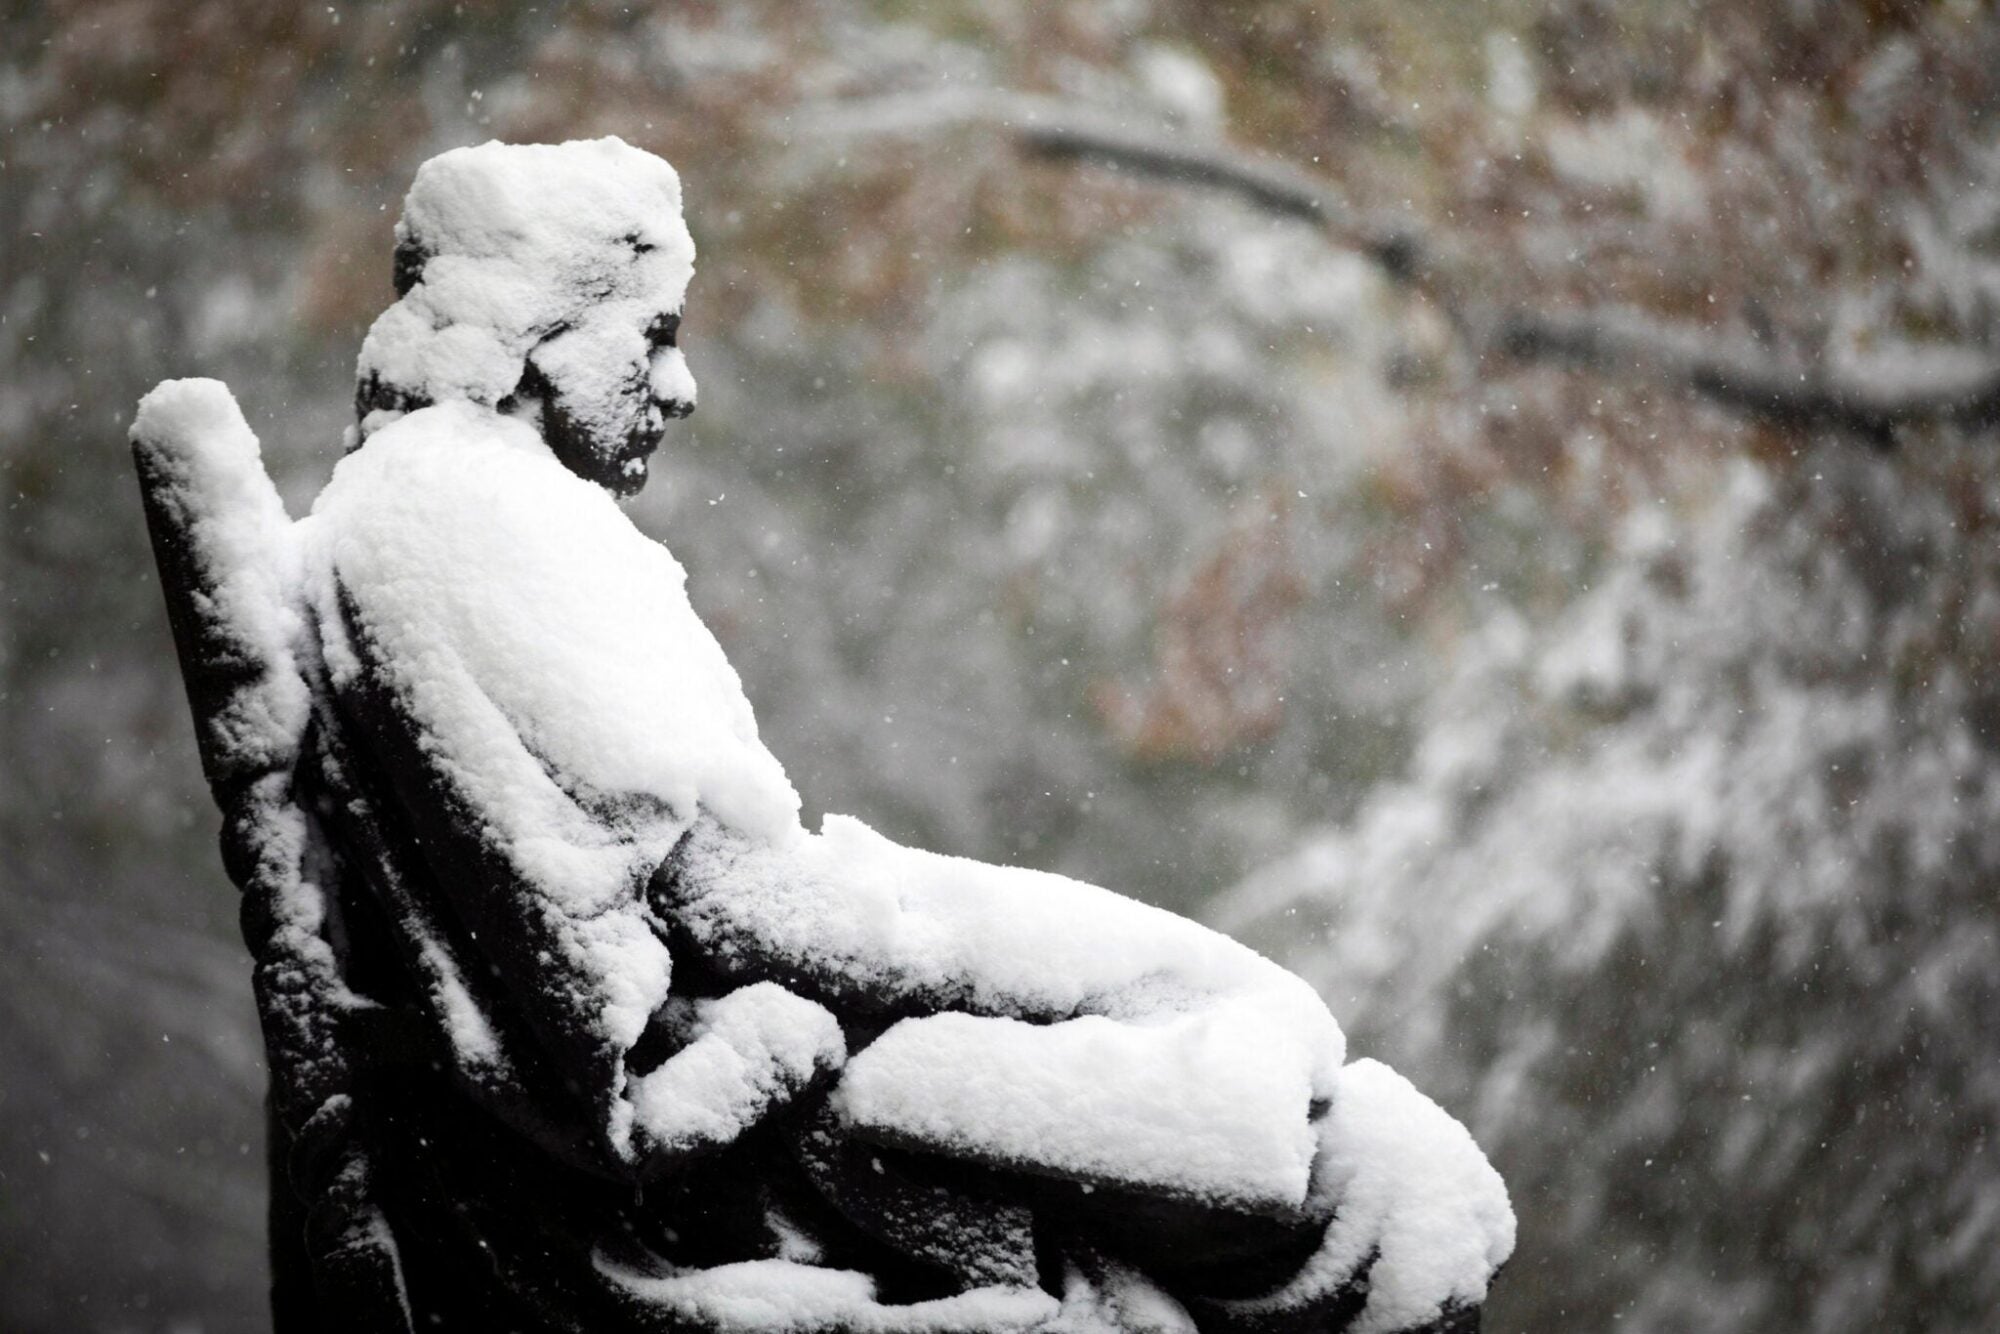 The John Harvard statue covered in snow